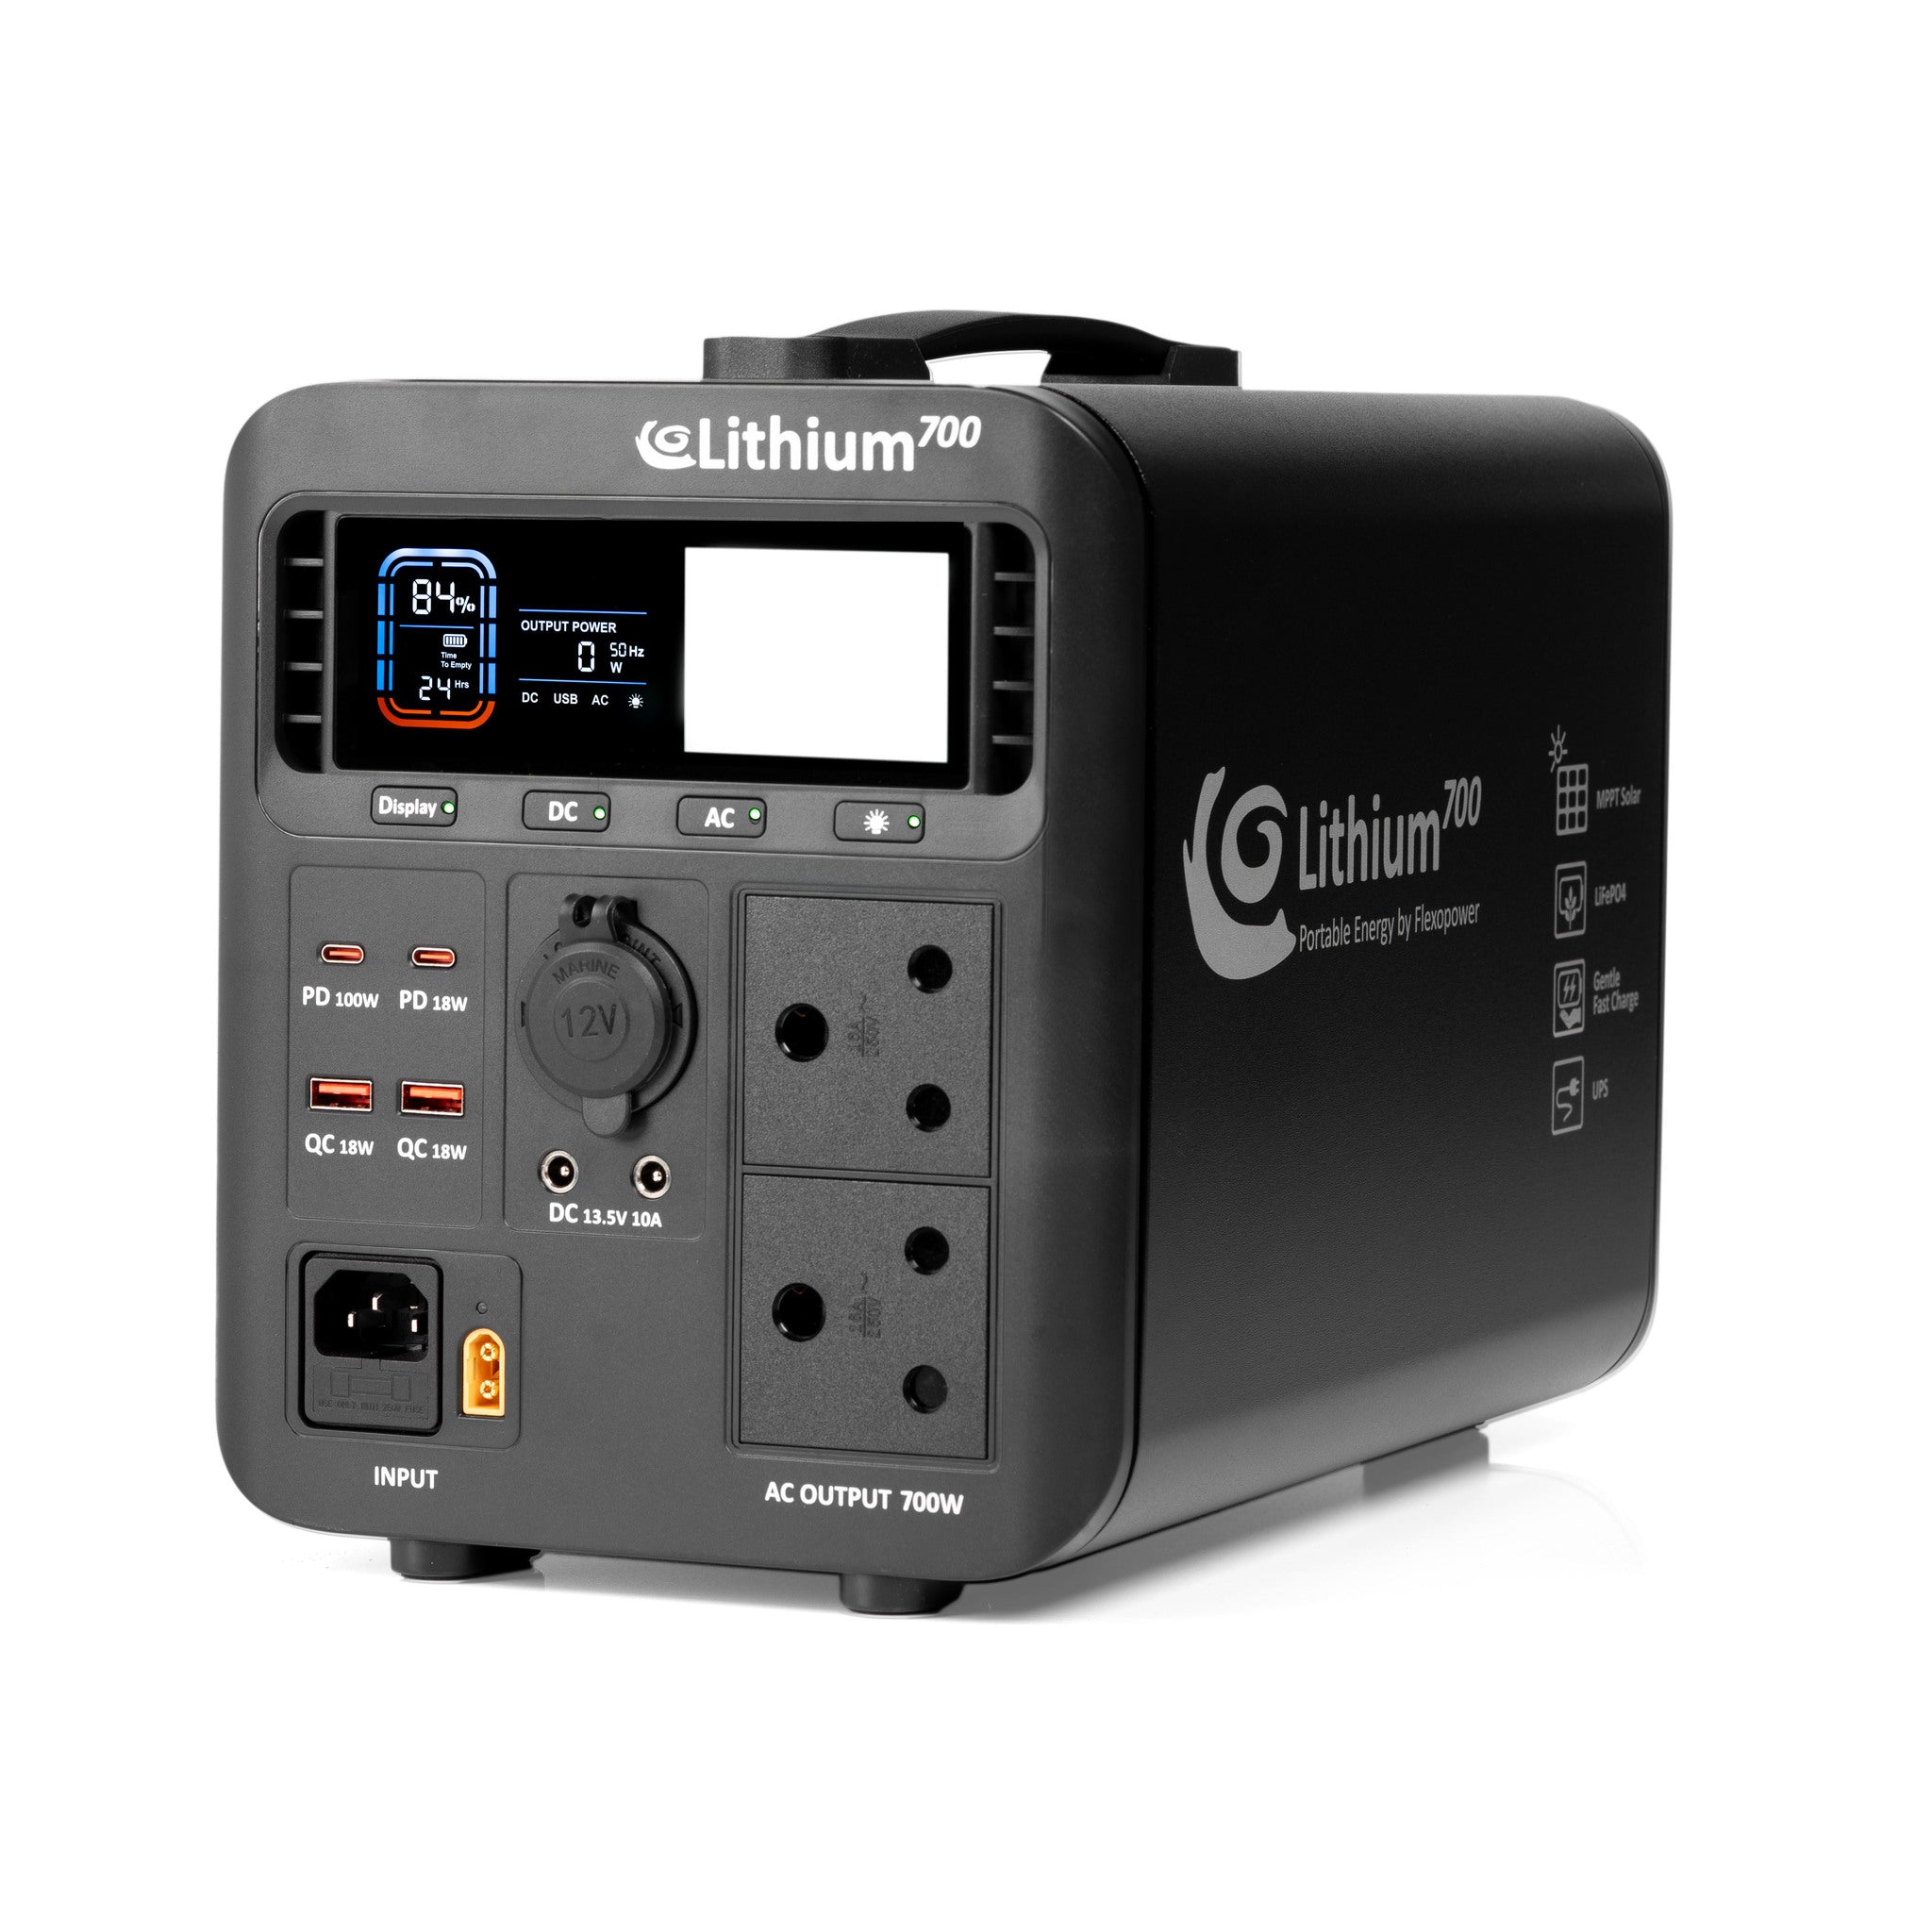 LITHIUM700 PORTABLE POWER STATION BY FLEXOPOWER